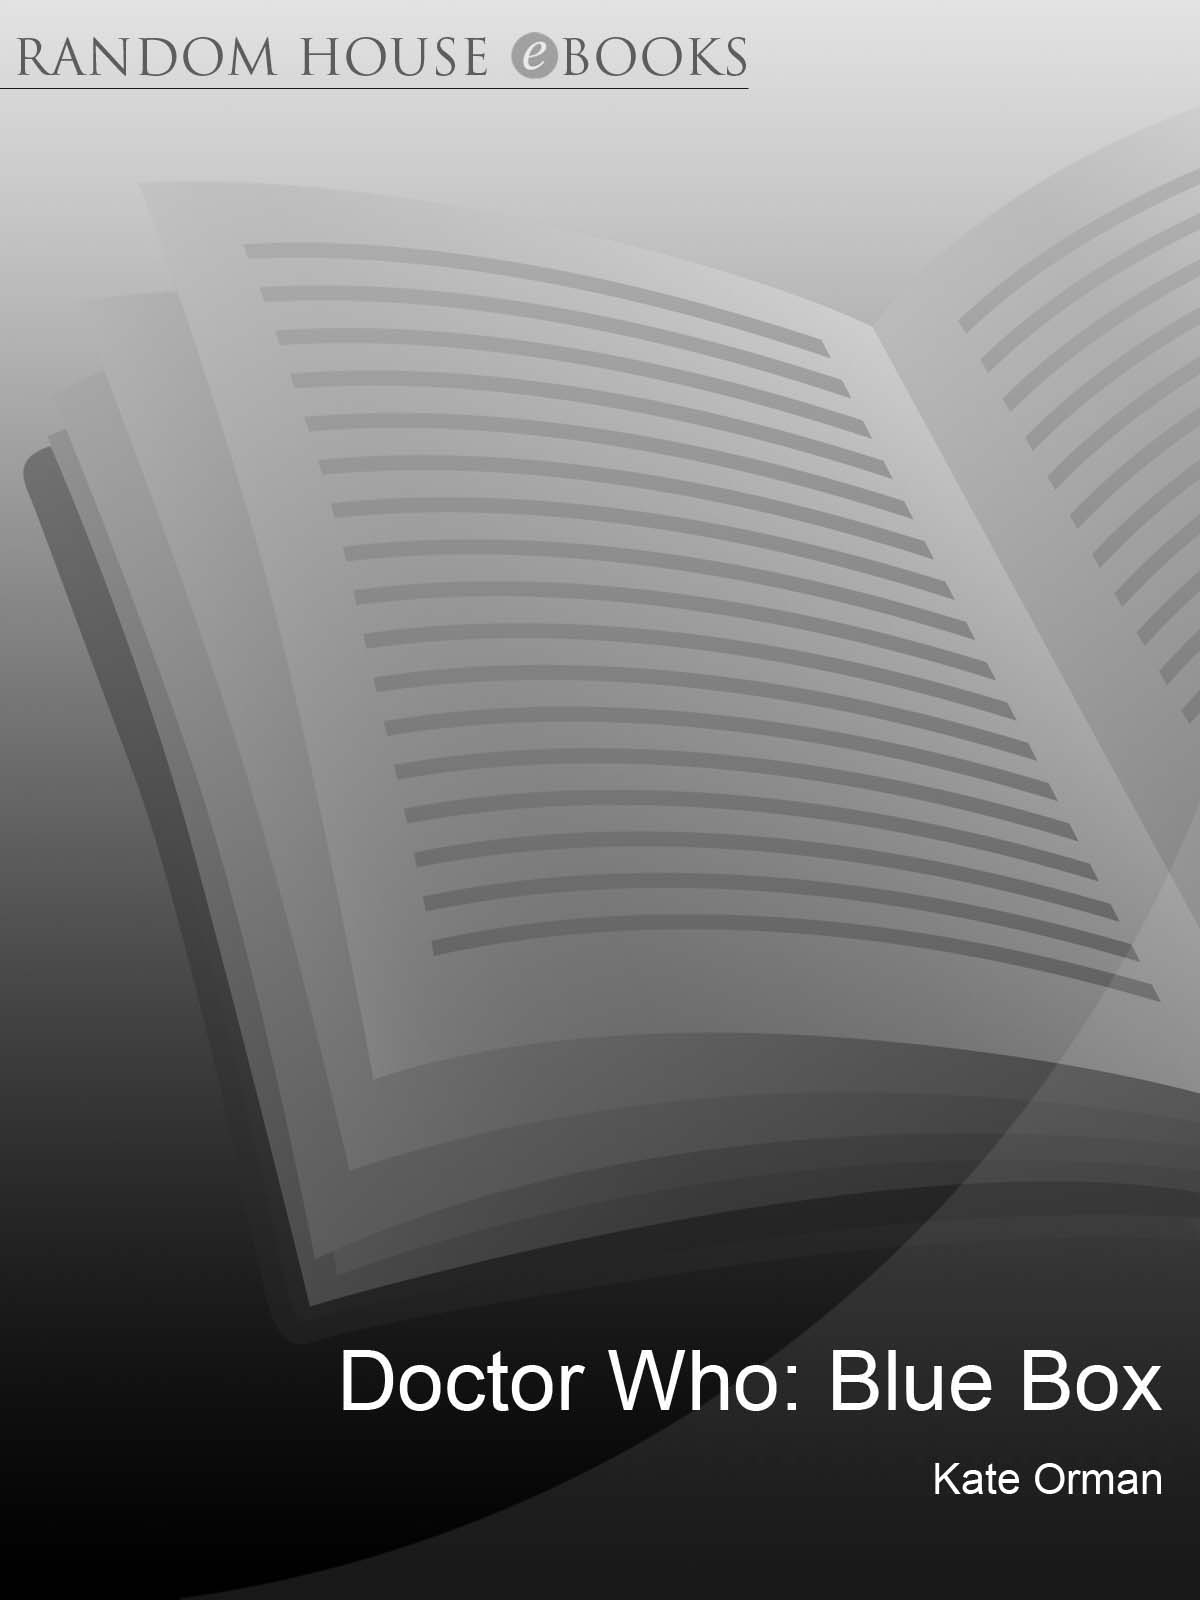 Doctor Who (2011) by Kate Orman